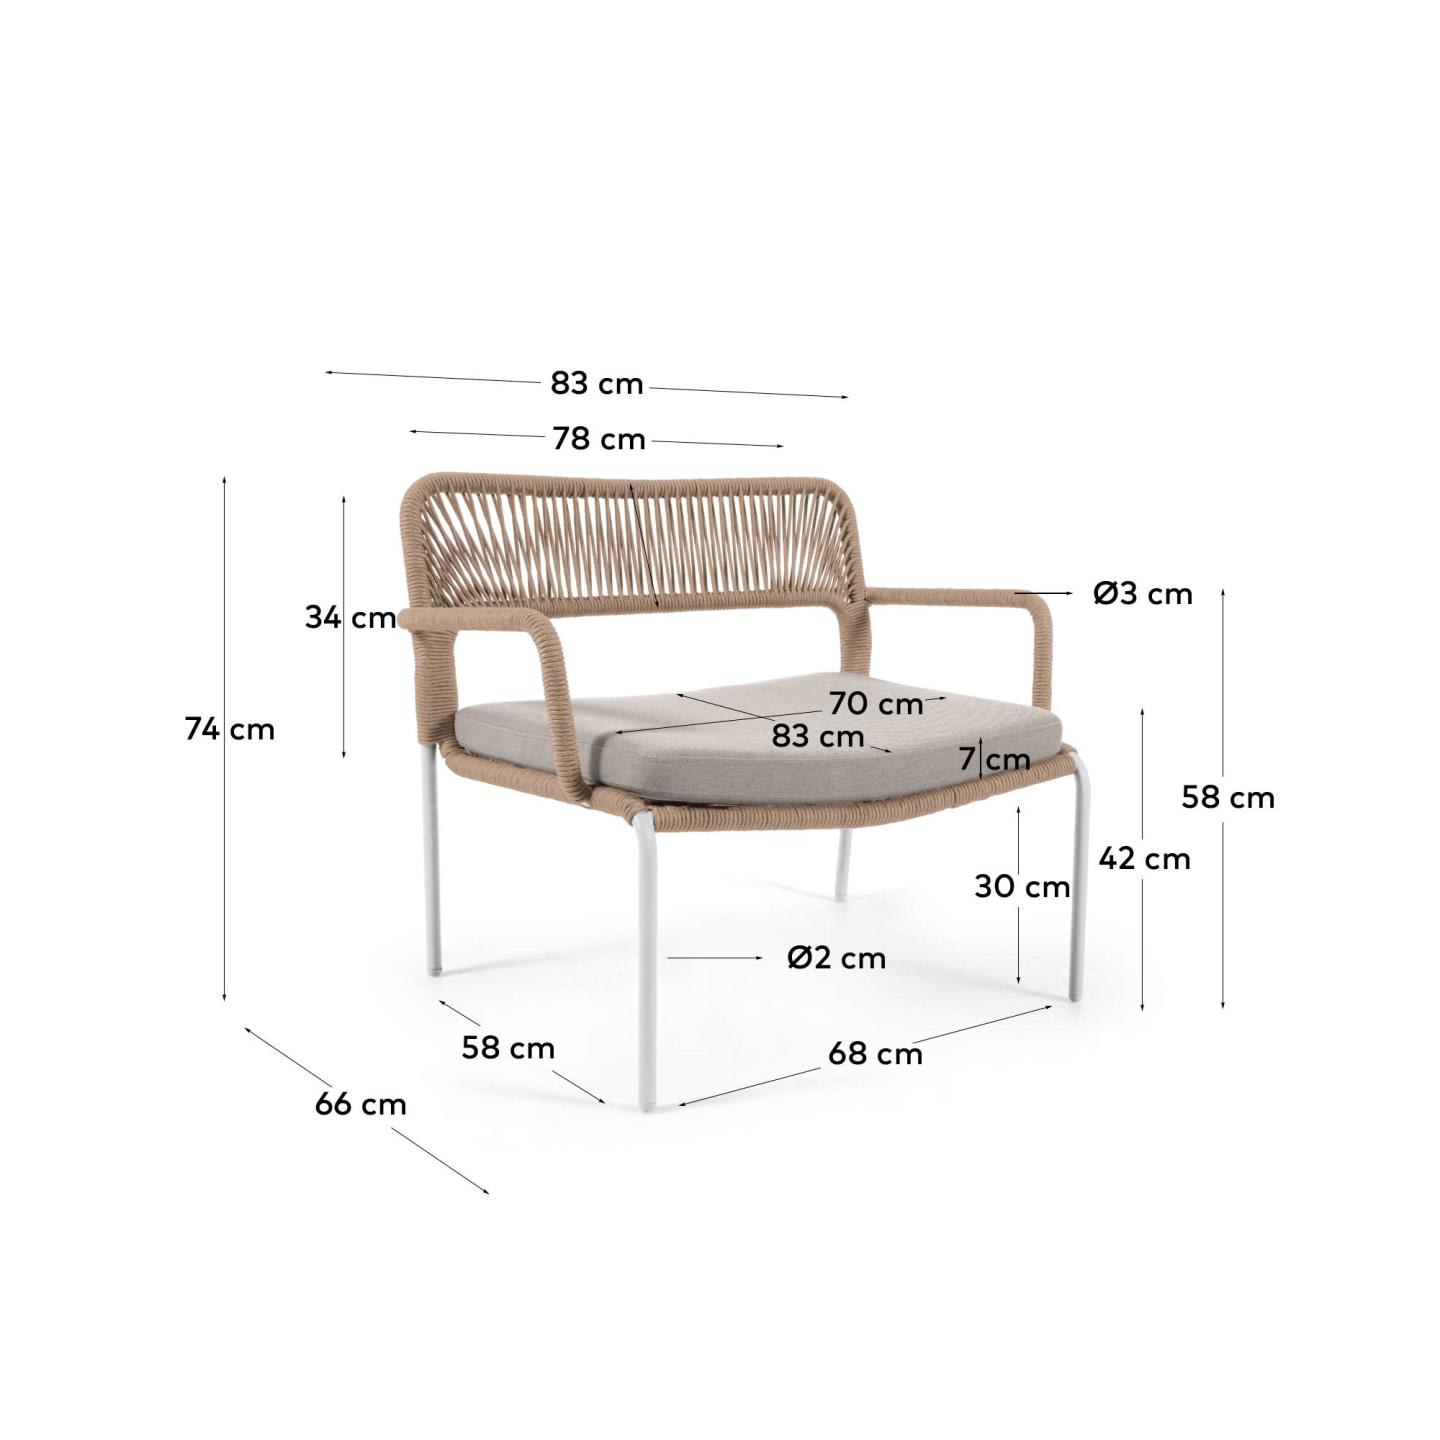 Cailin armchair in beige cord with galvanised steel legs painted white - sizes